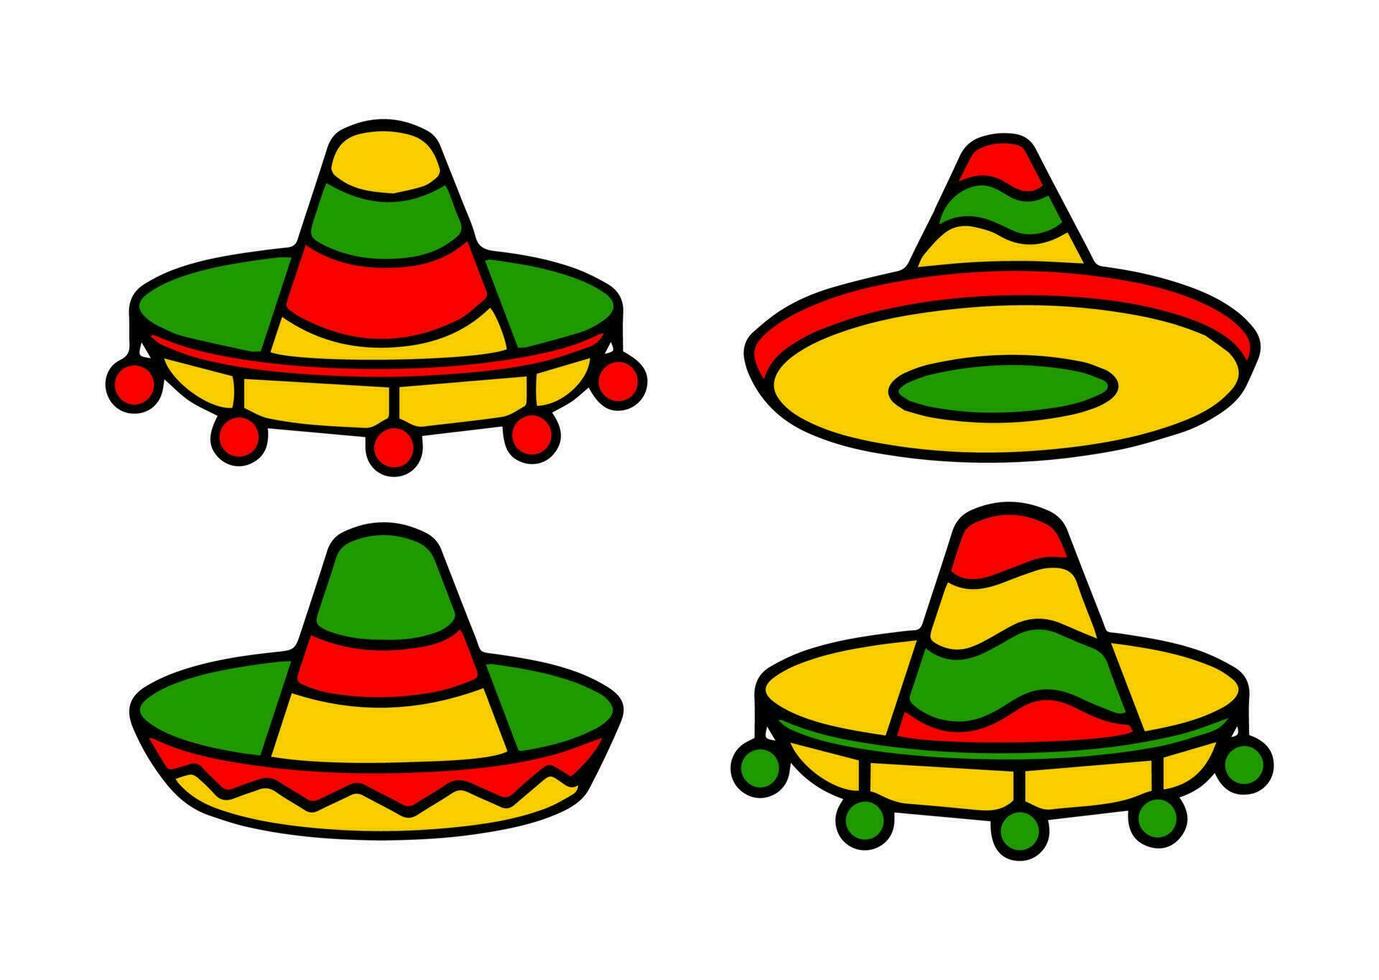 Mexican sombrero with ornament design on top. vector